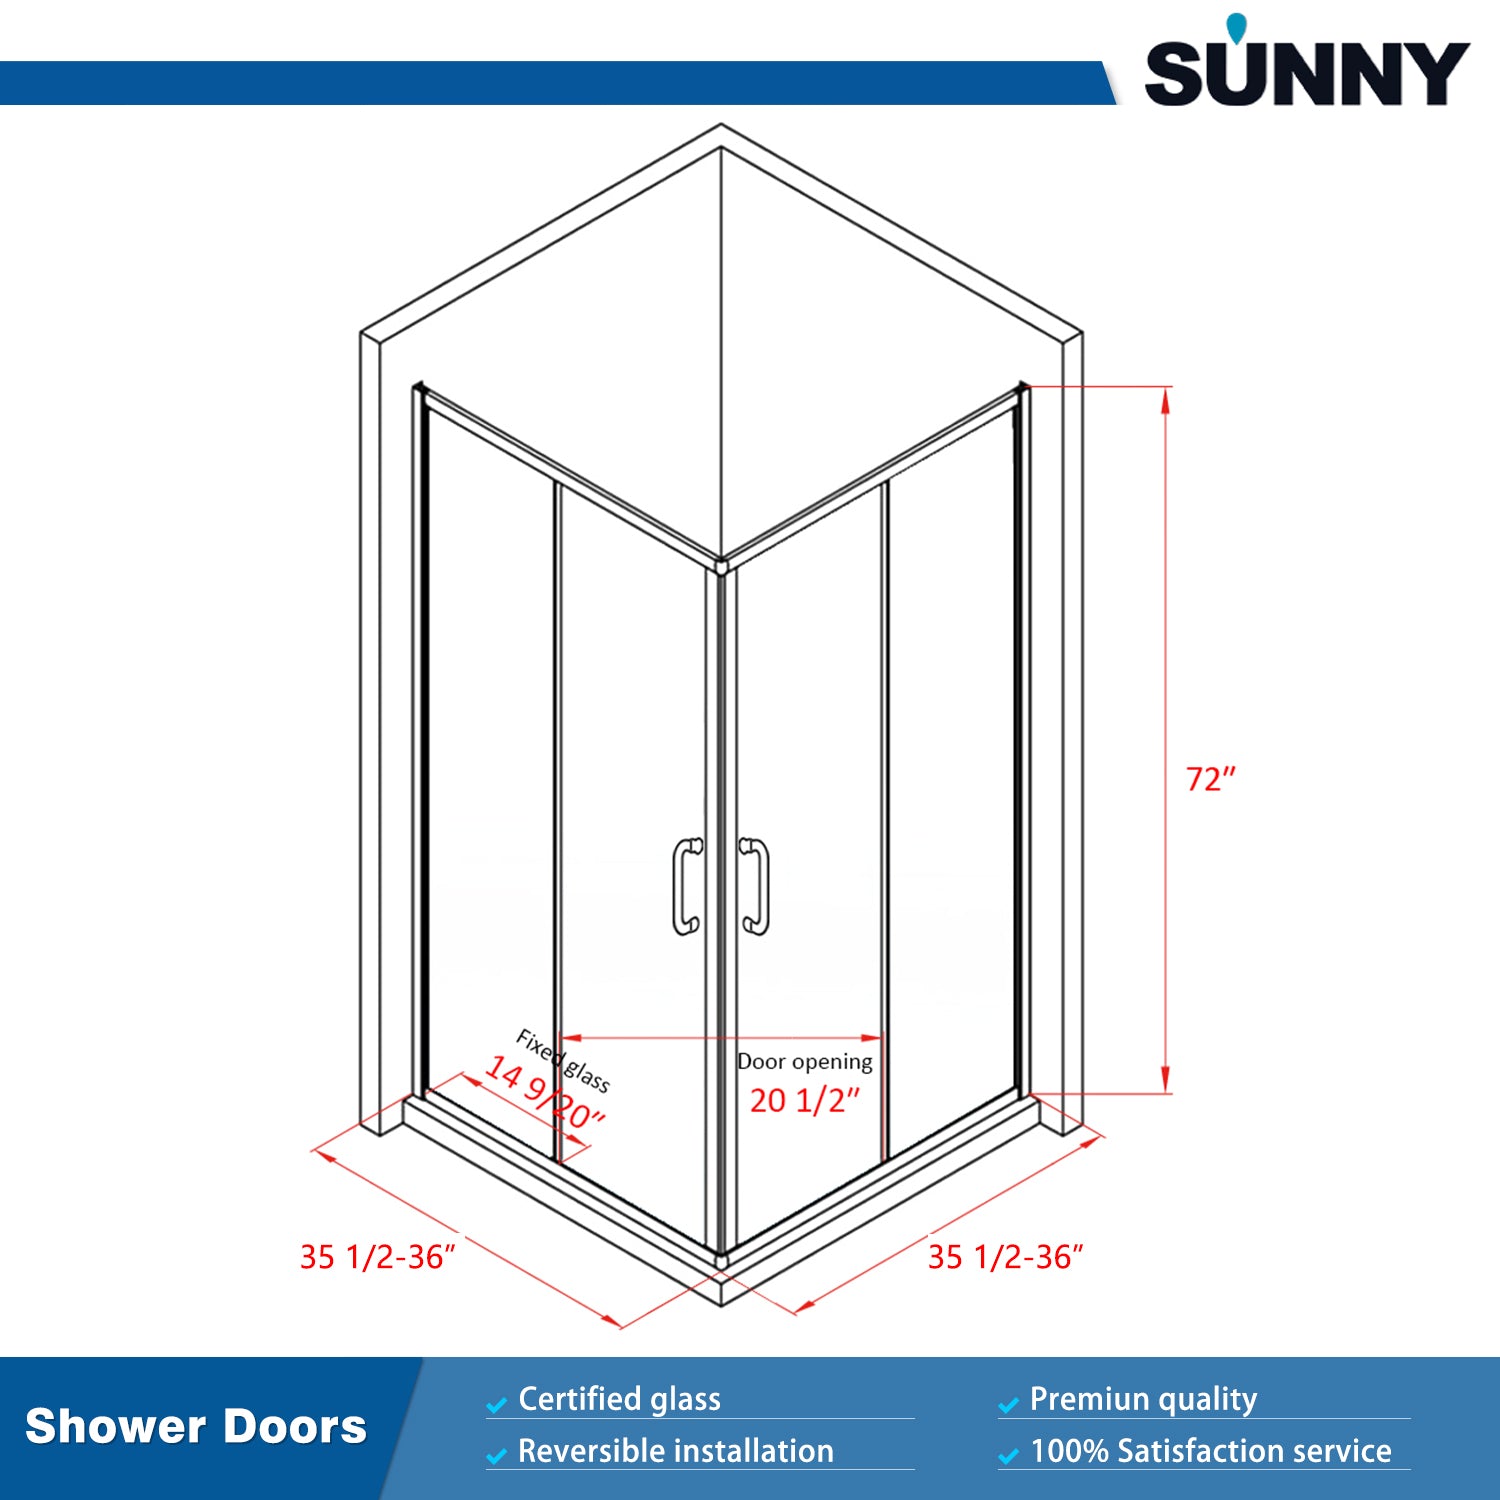 SUNNY SHOWER 36 in. W x 36 in. D x 72 in. H Chrome Finish Corner Entry Enclosure With Sliding Doors Dimensions